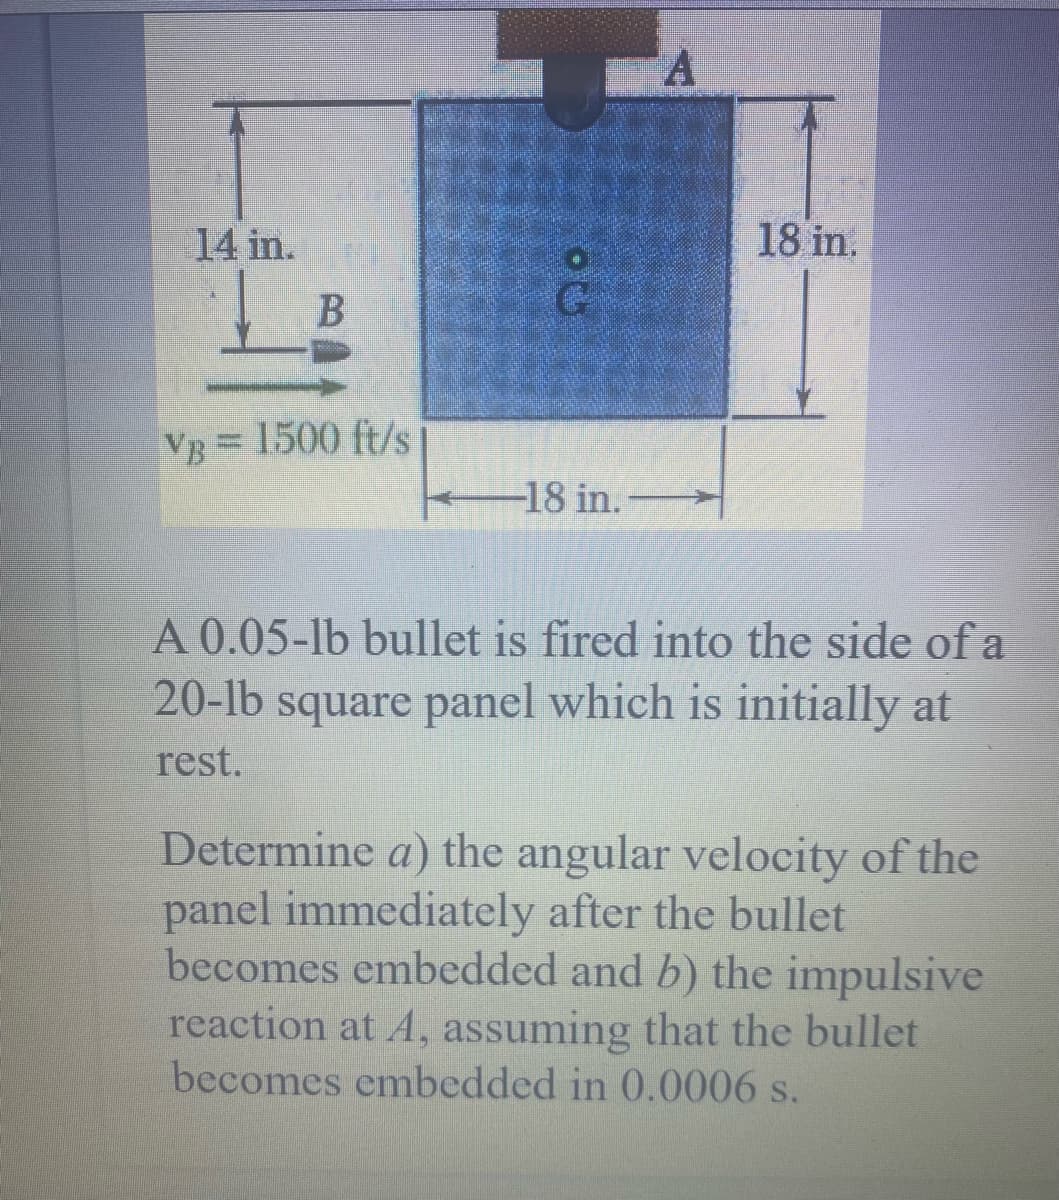 14 in.
18 in.
VB 1500 ft/s
-18 in.
A 0.05-lb bullet is fired into the side of a
20-lb square panel which is initially at
rest.
Determine a) the angular velocity of the
panel immediately after the bullet
becomes embedded and b) the impulsive
reaction at A, assuming that the bullet
becomes embedded in 0.0006 s.
B
